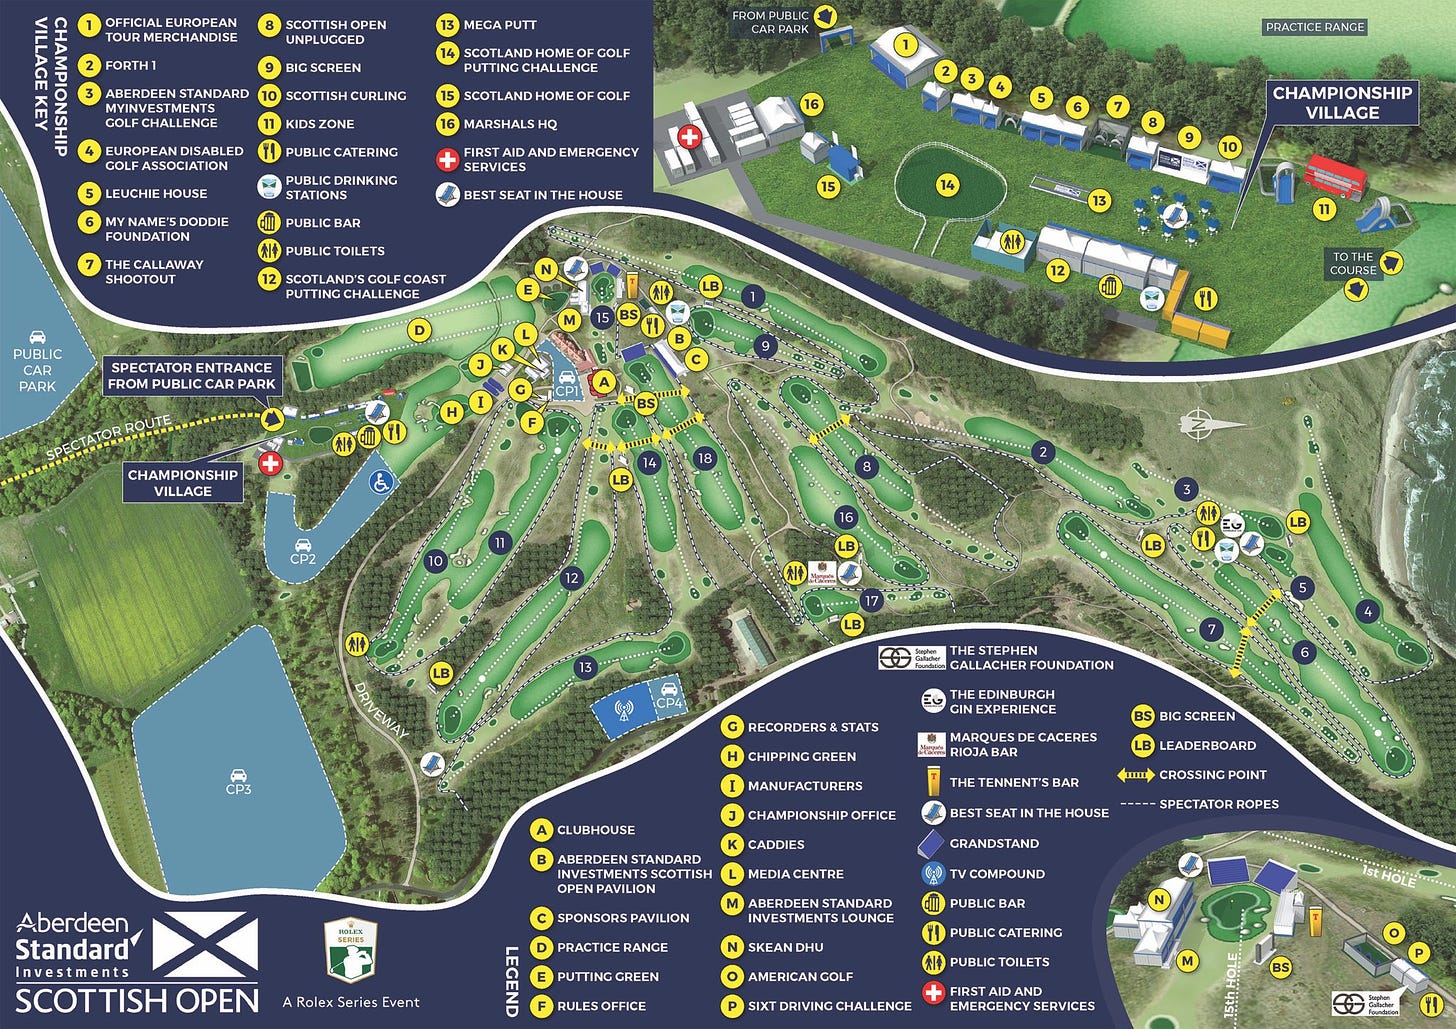 Genesis Scottish Open on Twitter: "🗺 YOUR #ASIScottishOpen MAP 🗺 Make  sure you check out the on-site map prior to arriving at The Renaissance Club  next week👍 For more on on-site activities,